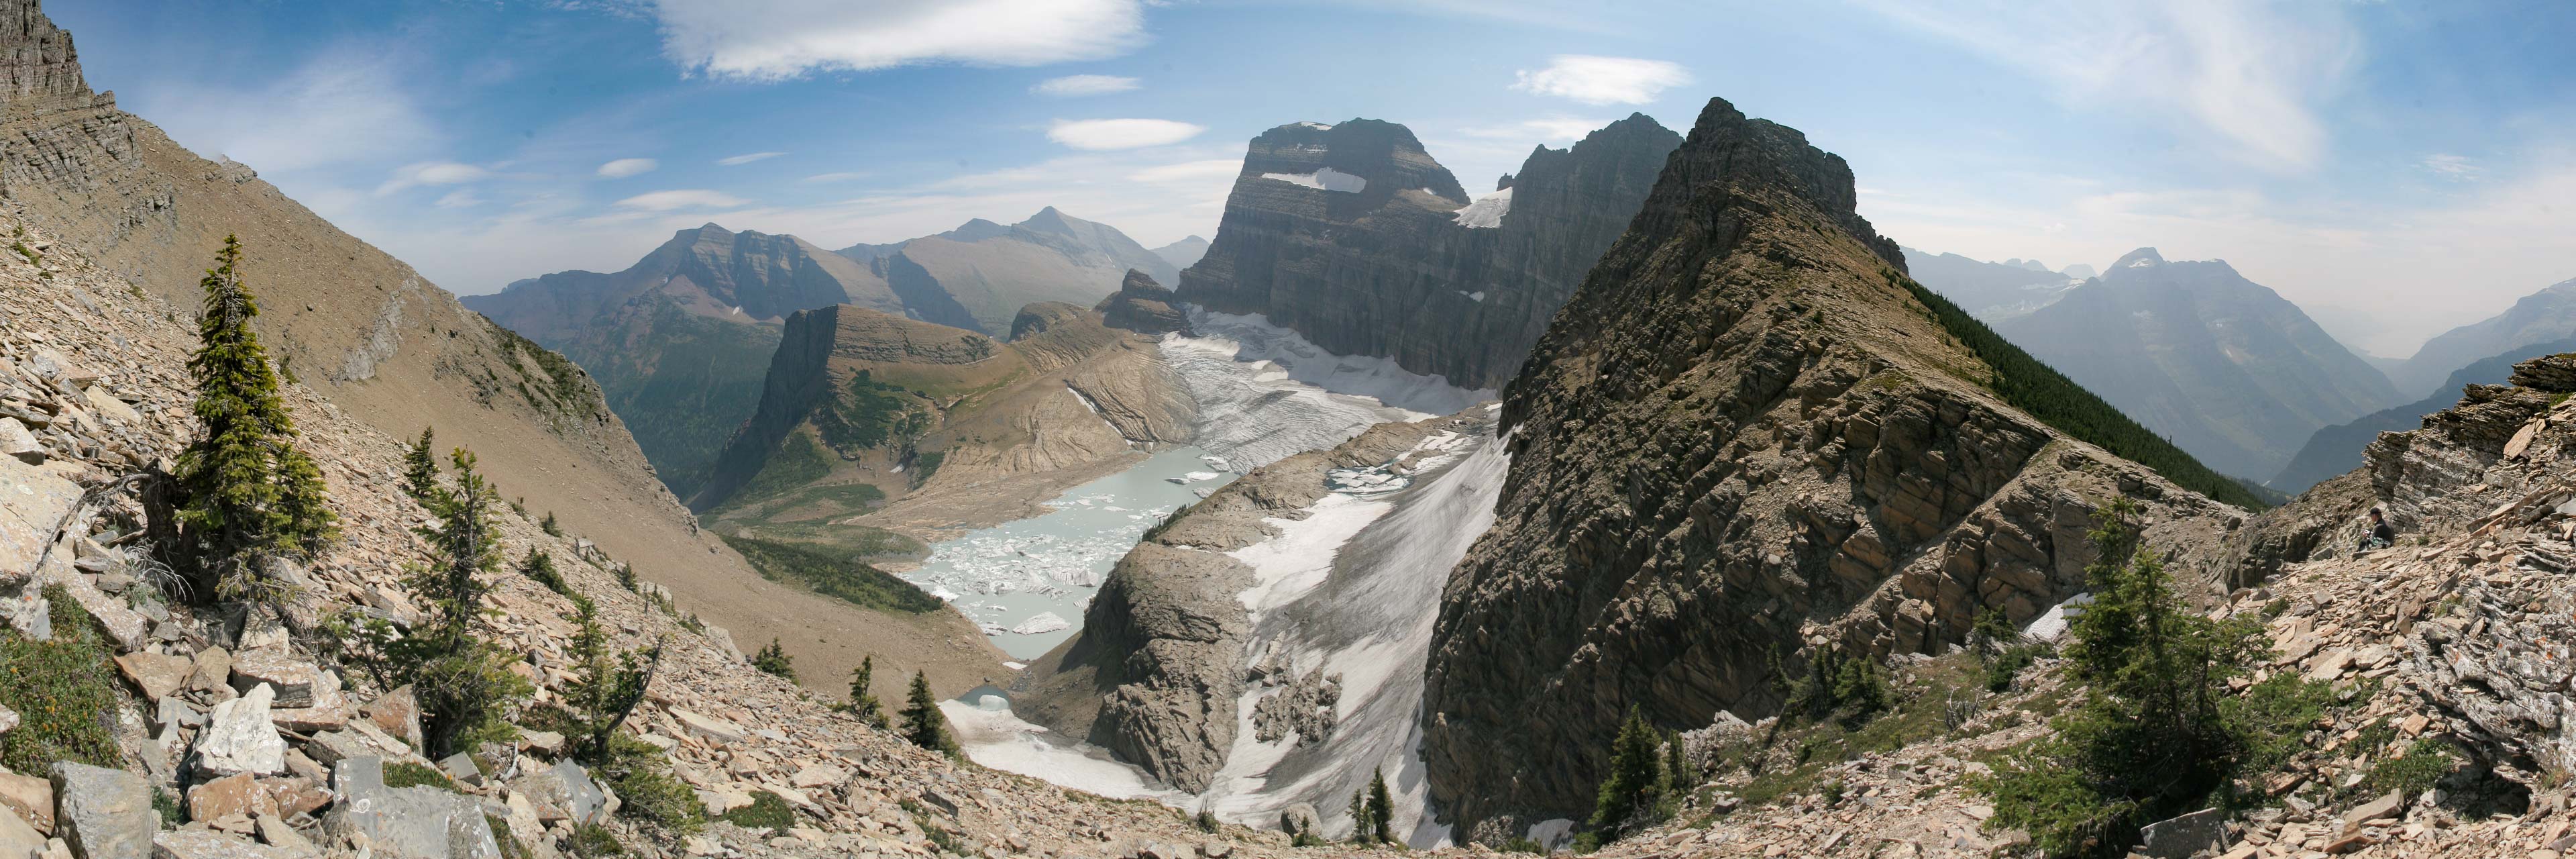 Grinnell glacier overlook panorama